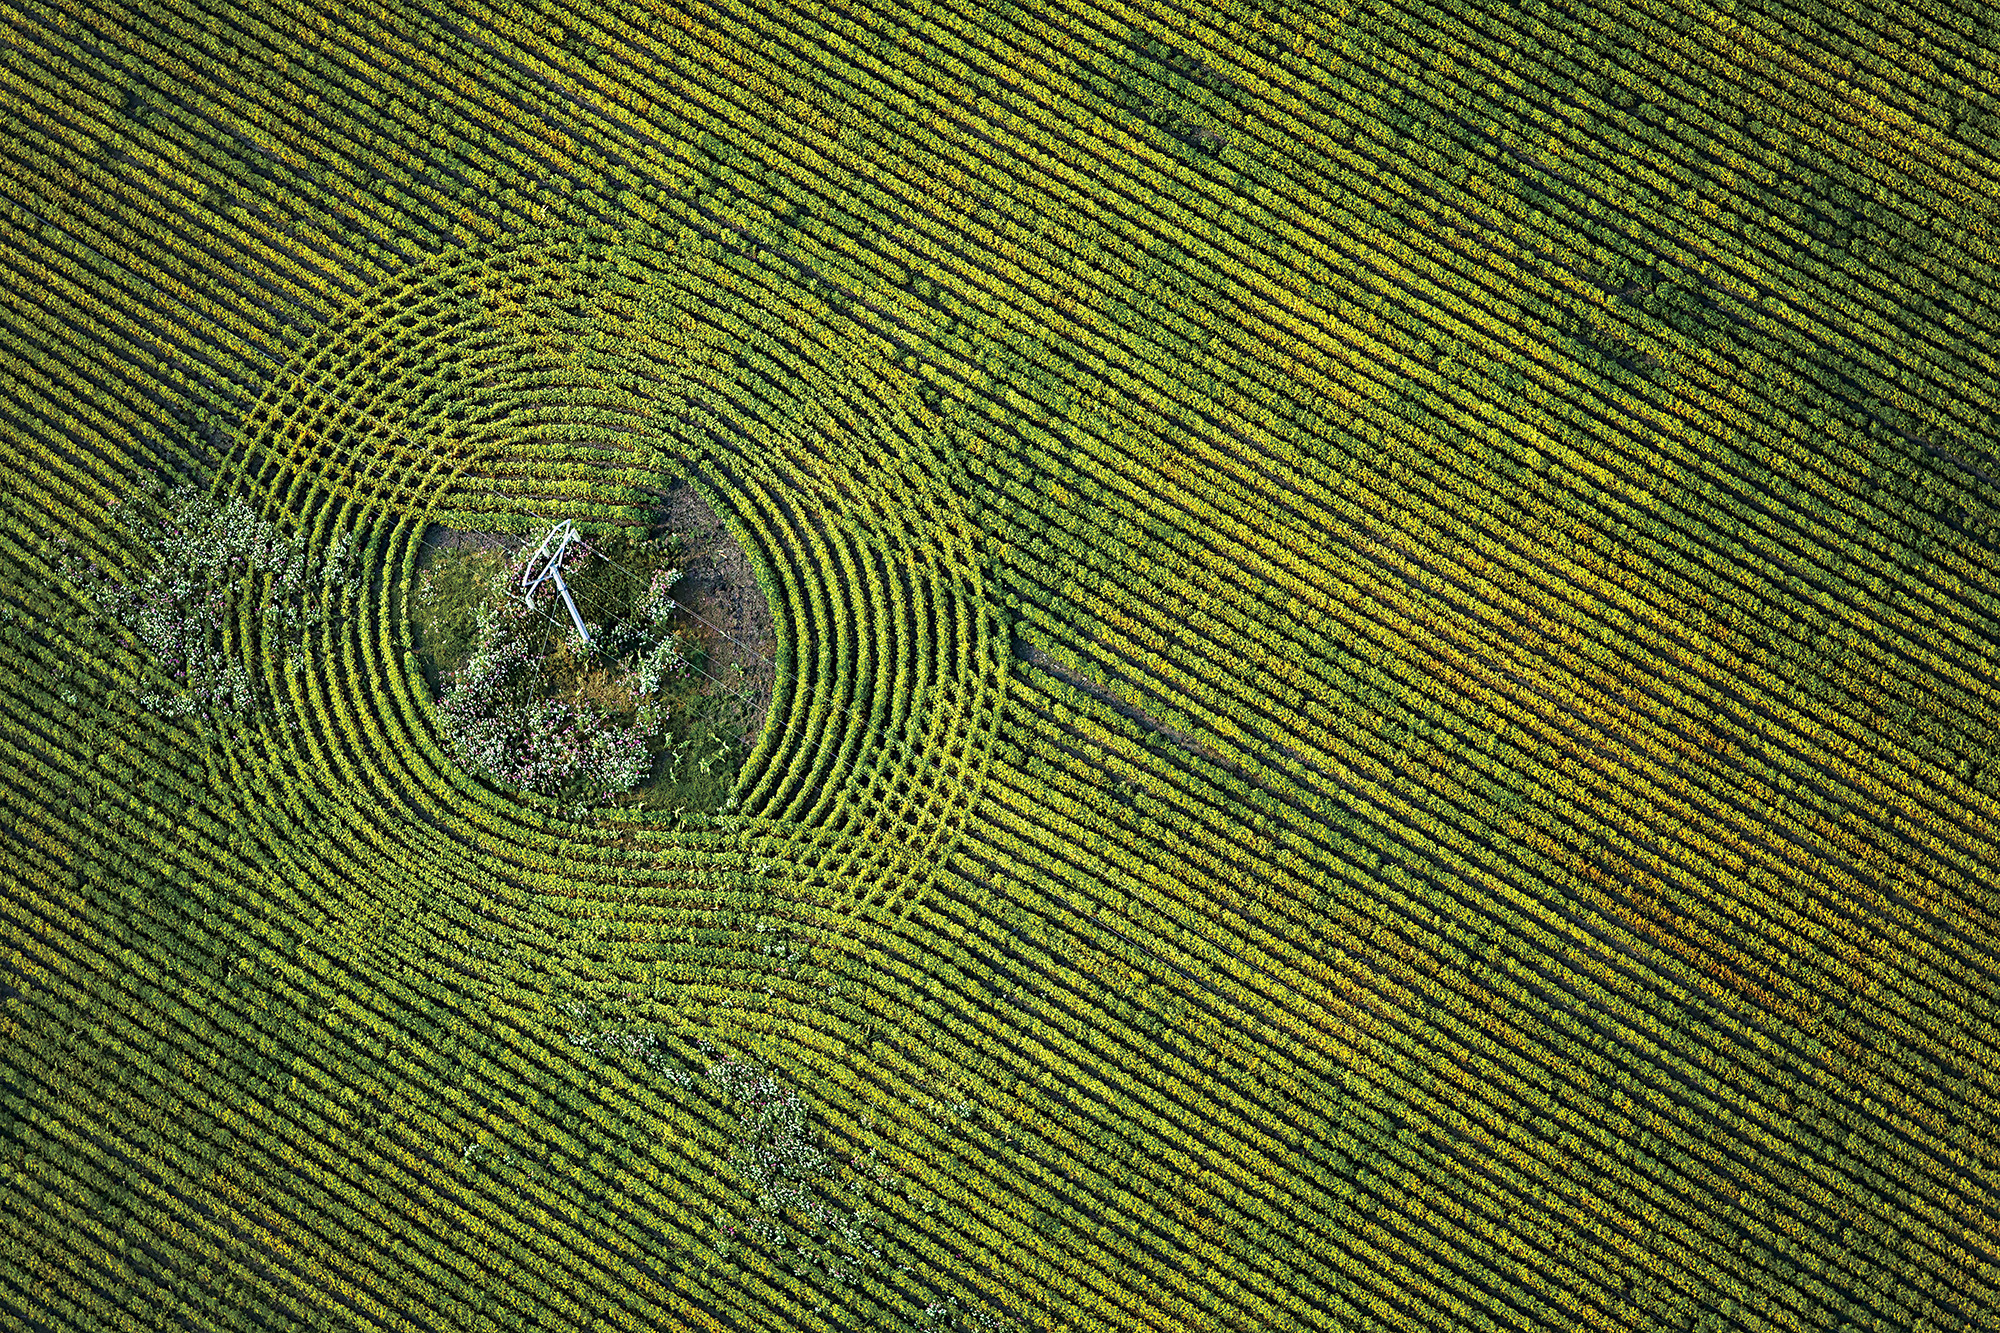 A Farmer’S Moiré Pattern Of Wheat Surrounds A Pylon In The Eastern Free State, South Africa Jan And Jay Roode